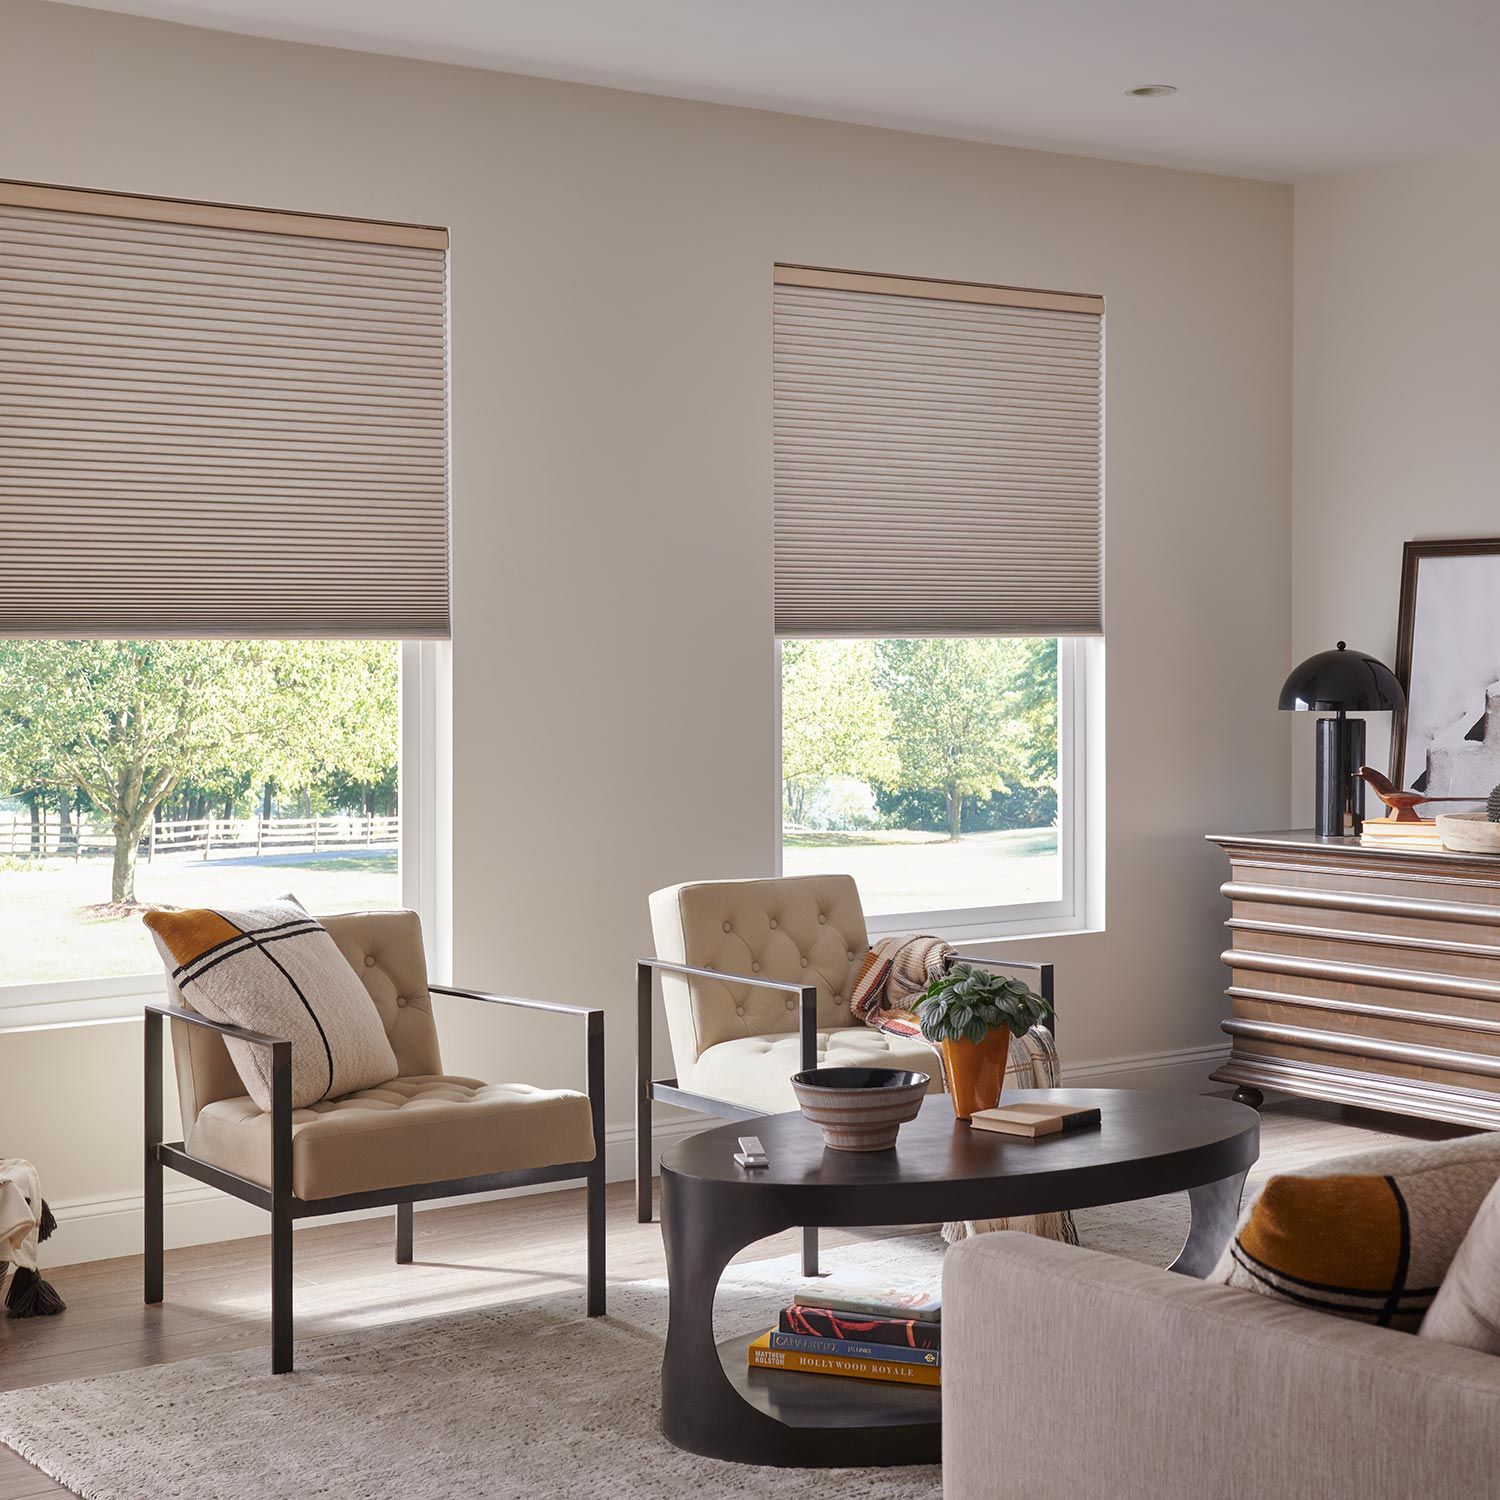 Lutron Shades in a neutral colored living room